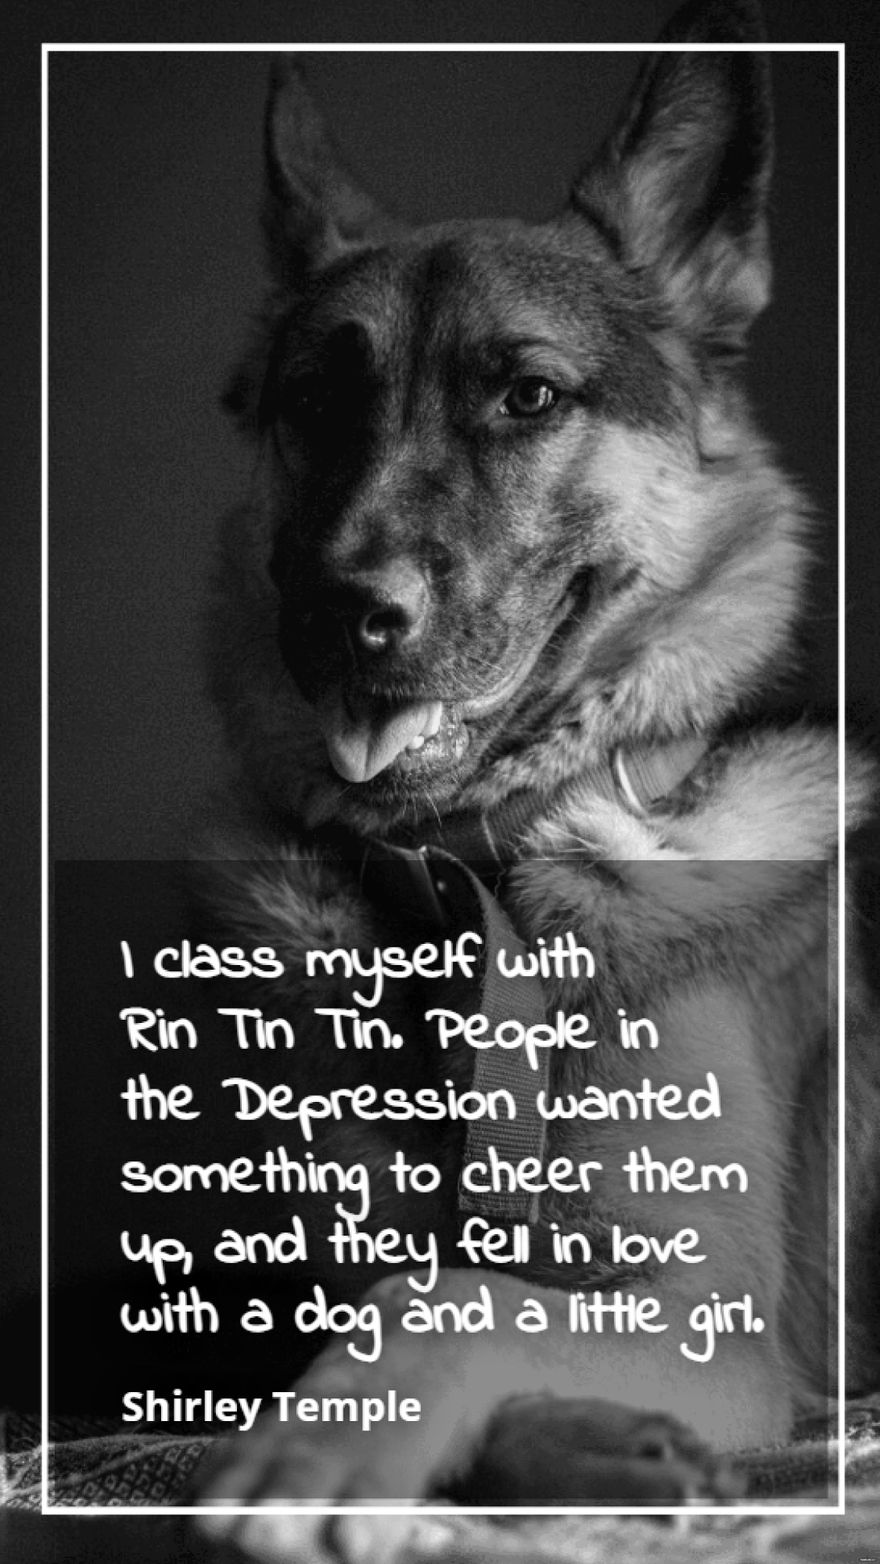 Shirley Temple - I class myself with Rin Tin Tin. People in the Depression wanted something to cheer them up, and they fell in love with a dog and a little girl.